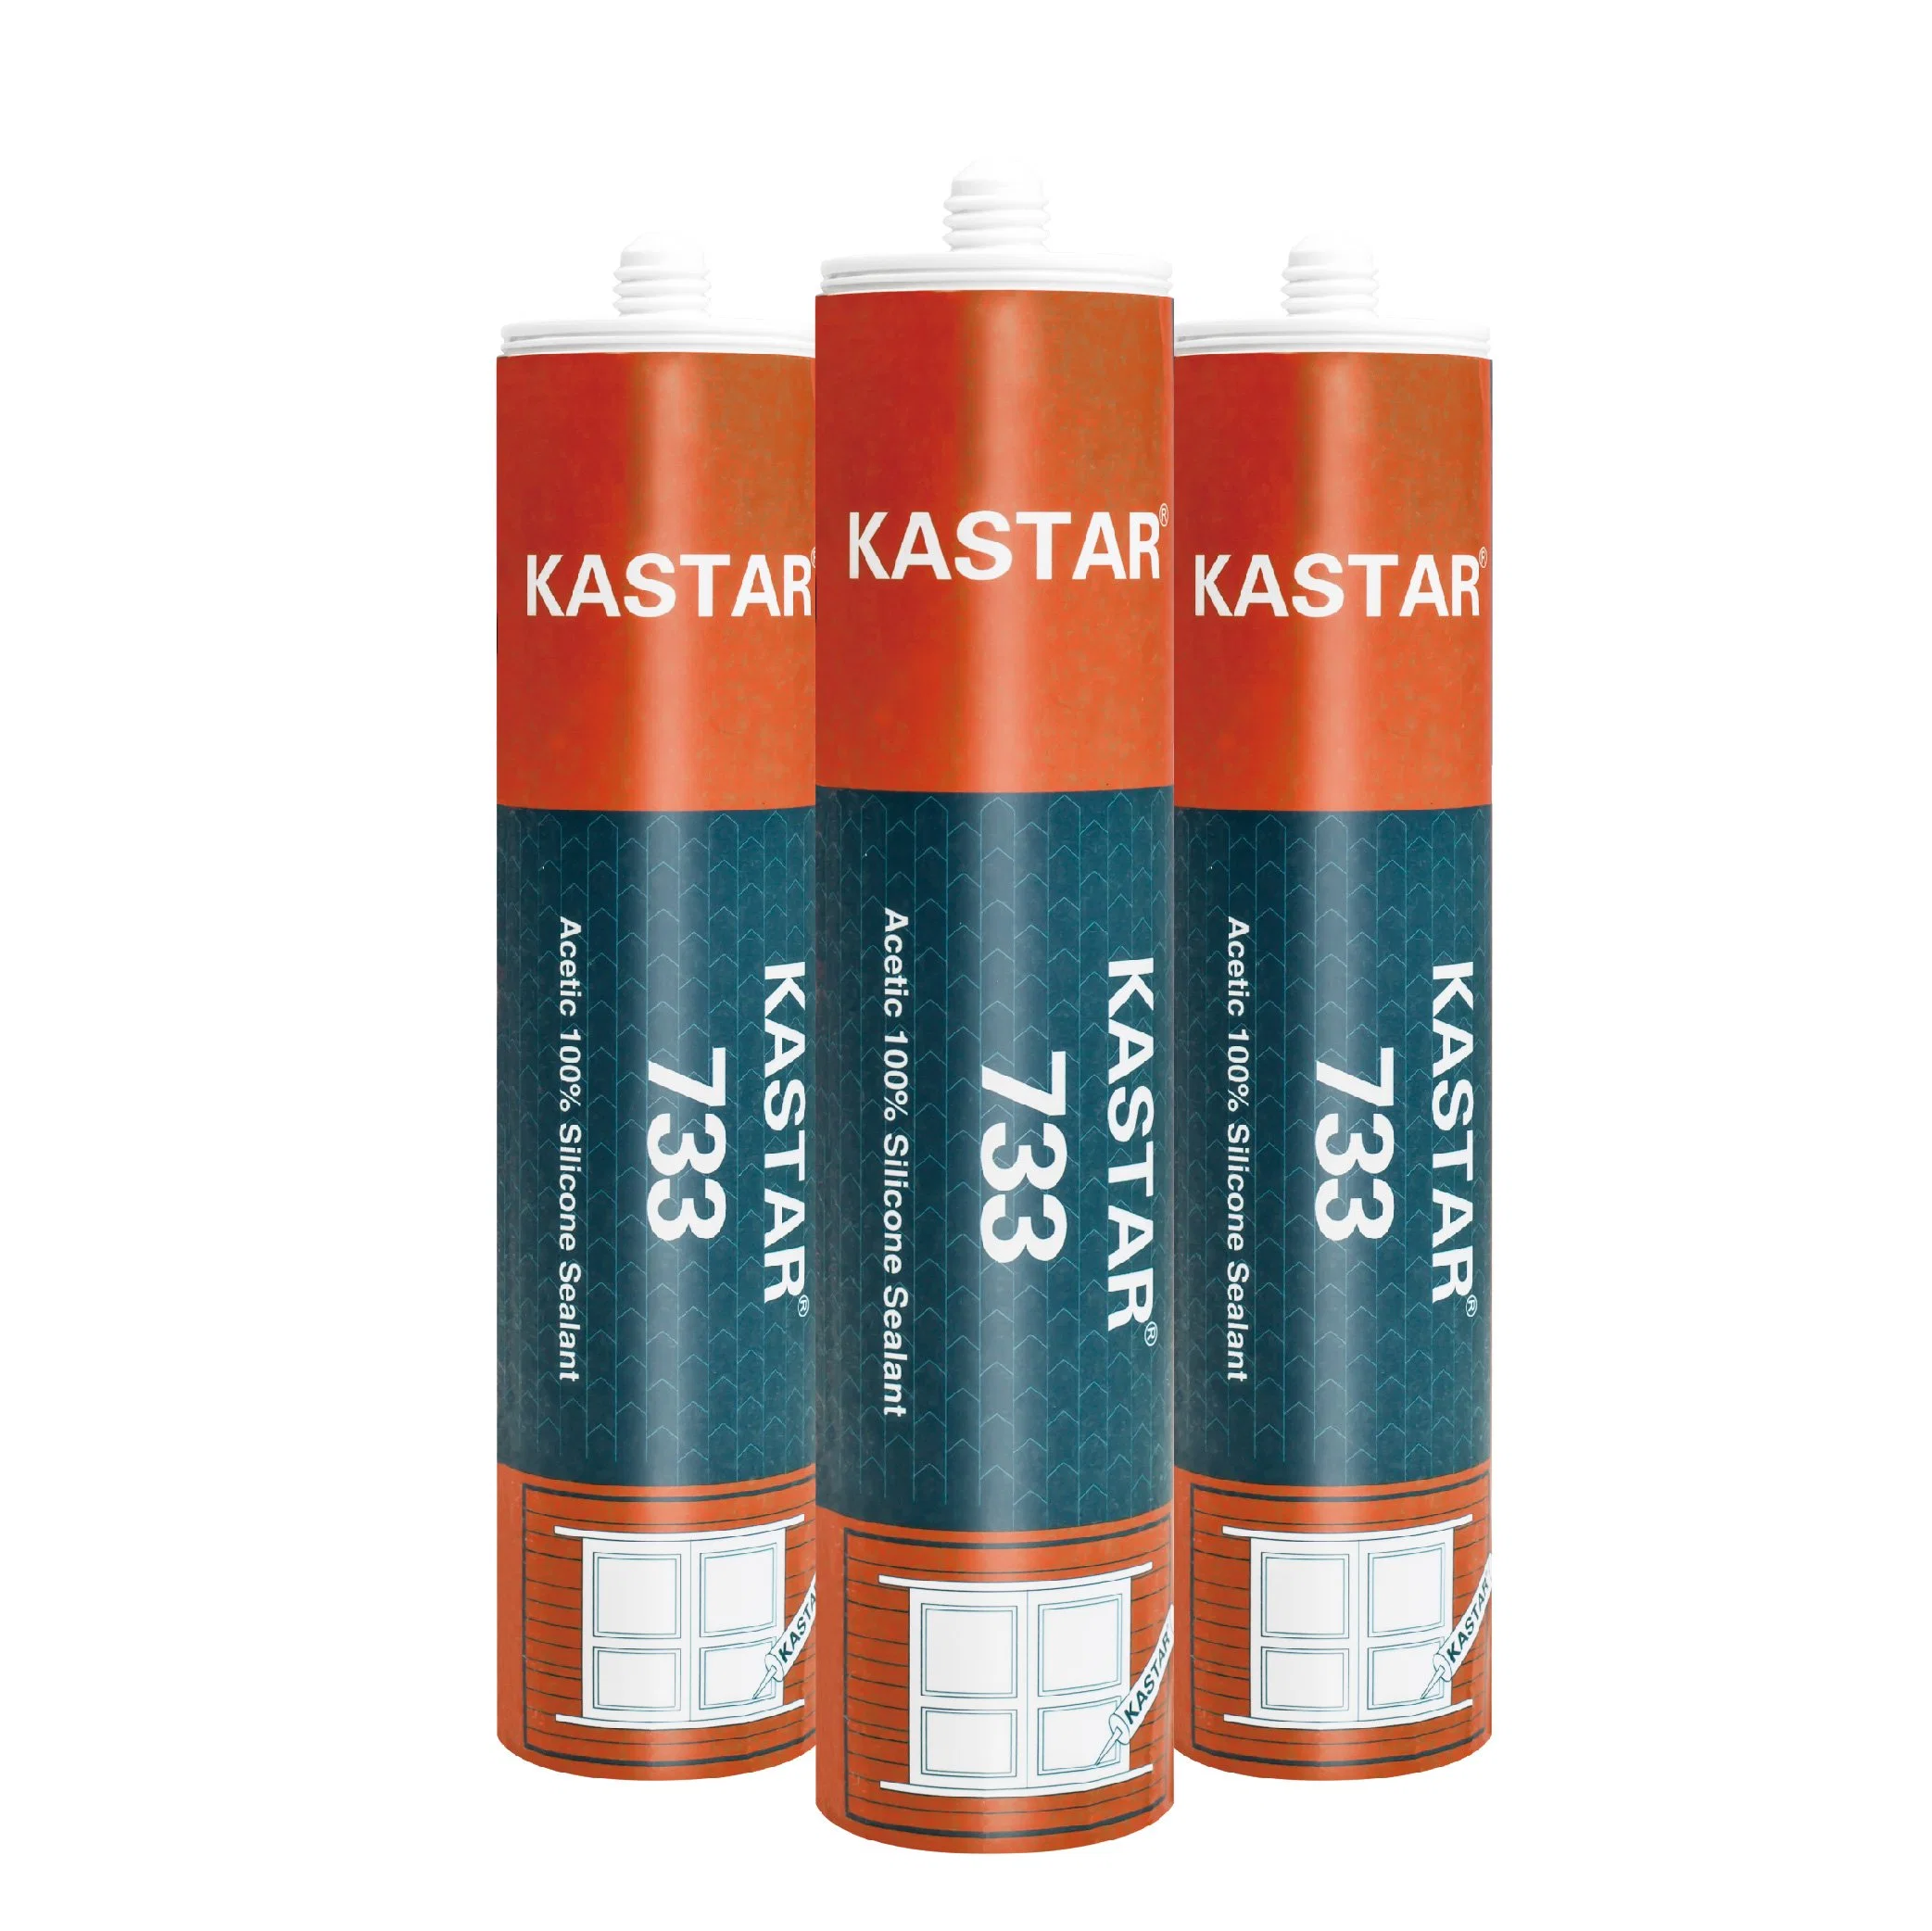 Kastar 730 Gp Acetoxy Silicone Sealant for General Purpose